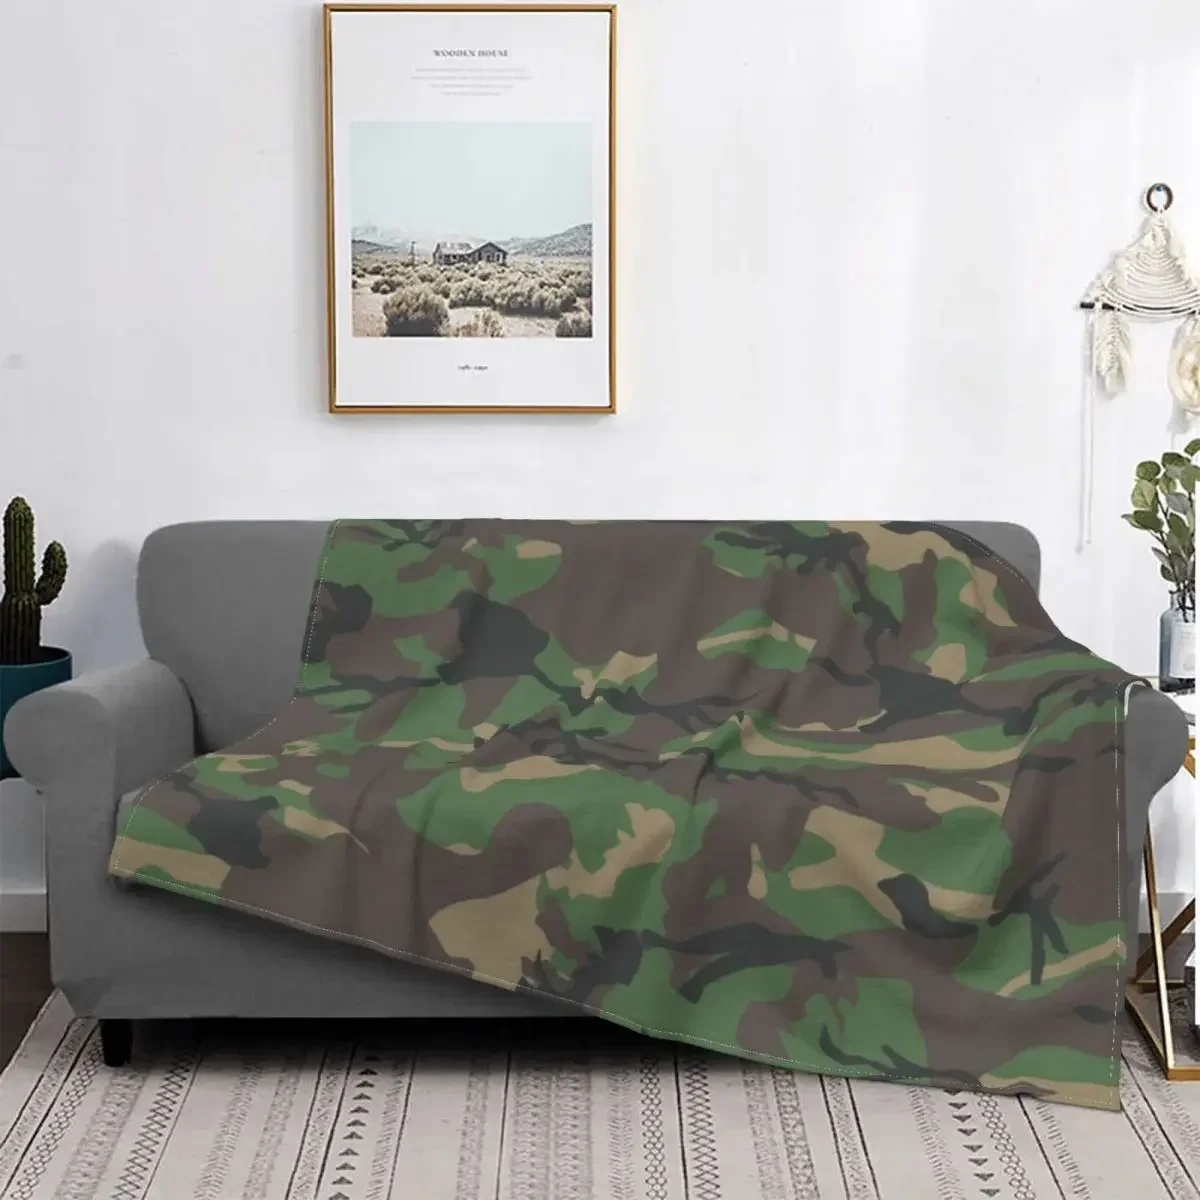 

Camouflage Military Flannel Blanket Fashion Bed Sofa Air Conditioning Fashionable LeisurePicnic Travel Napping CustomizableThrow